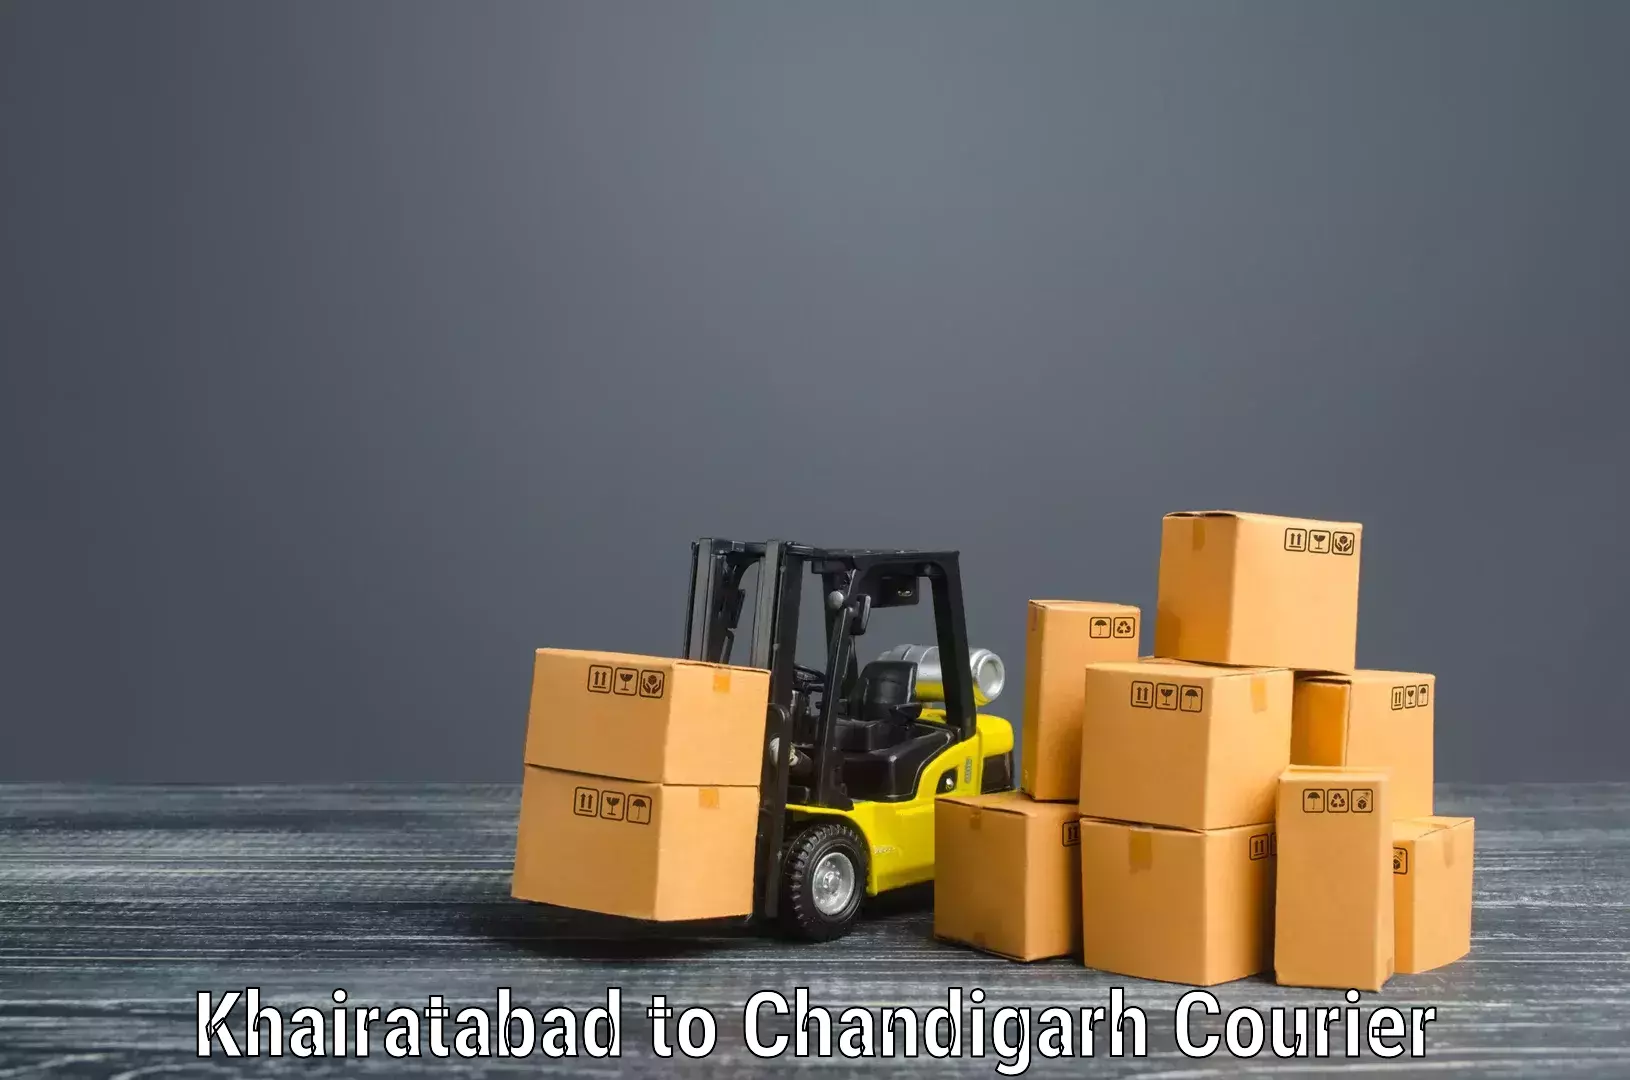 Furniture delivery service Khairatabad to Kharar